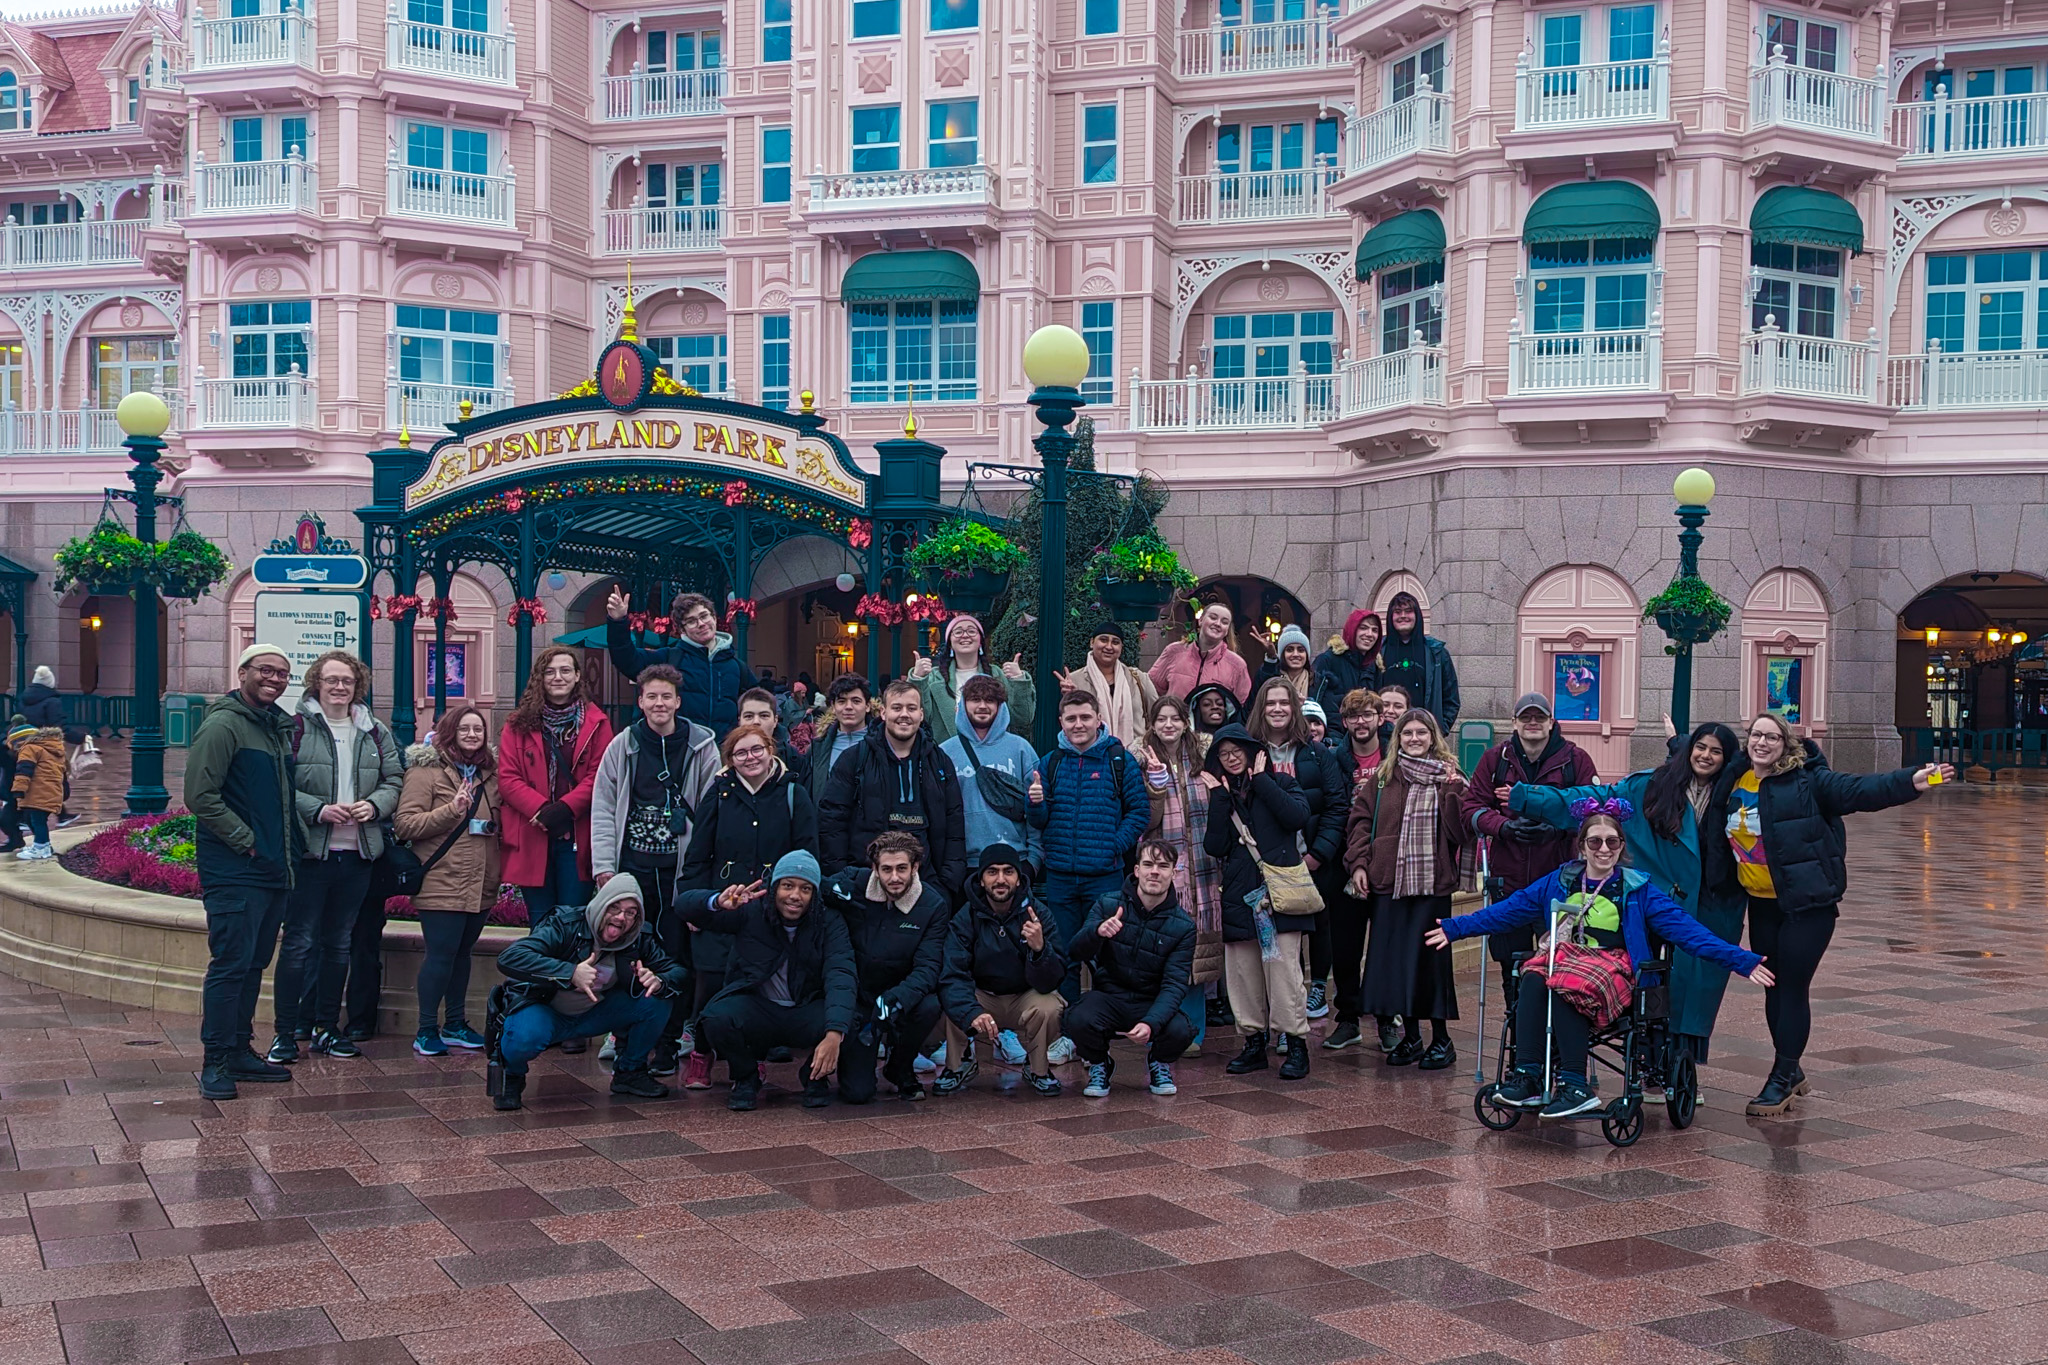 Our students stood together at Euro Disney in Paris, France.